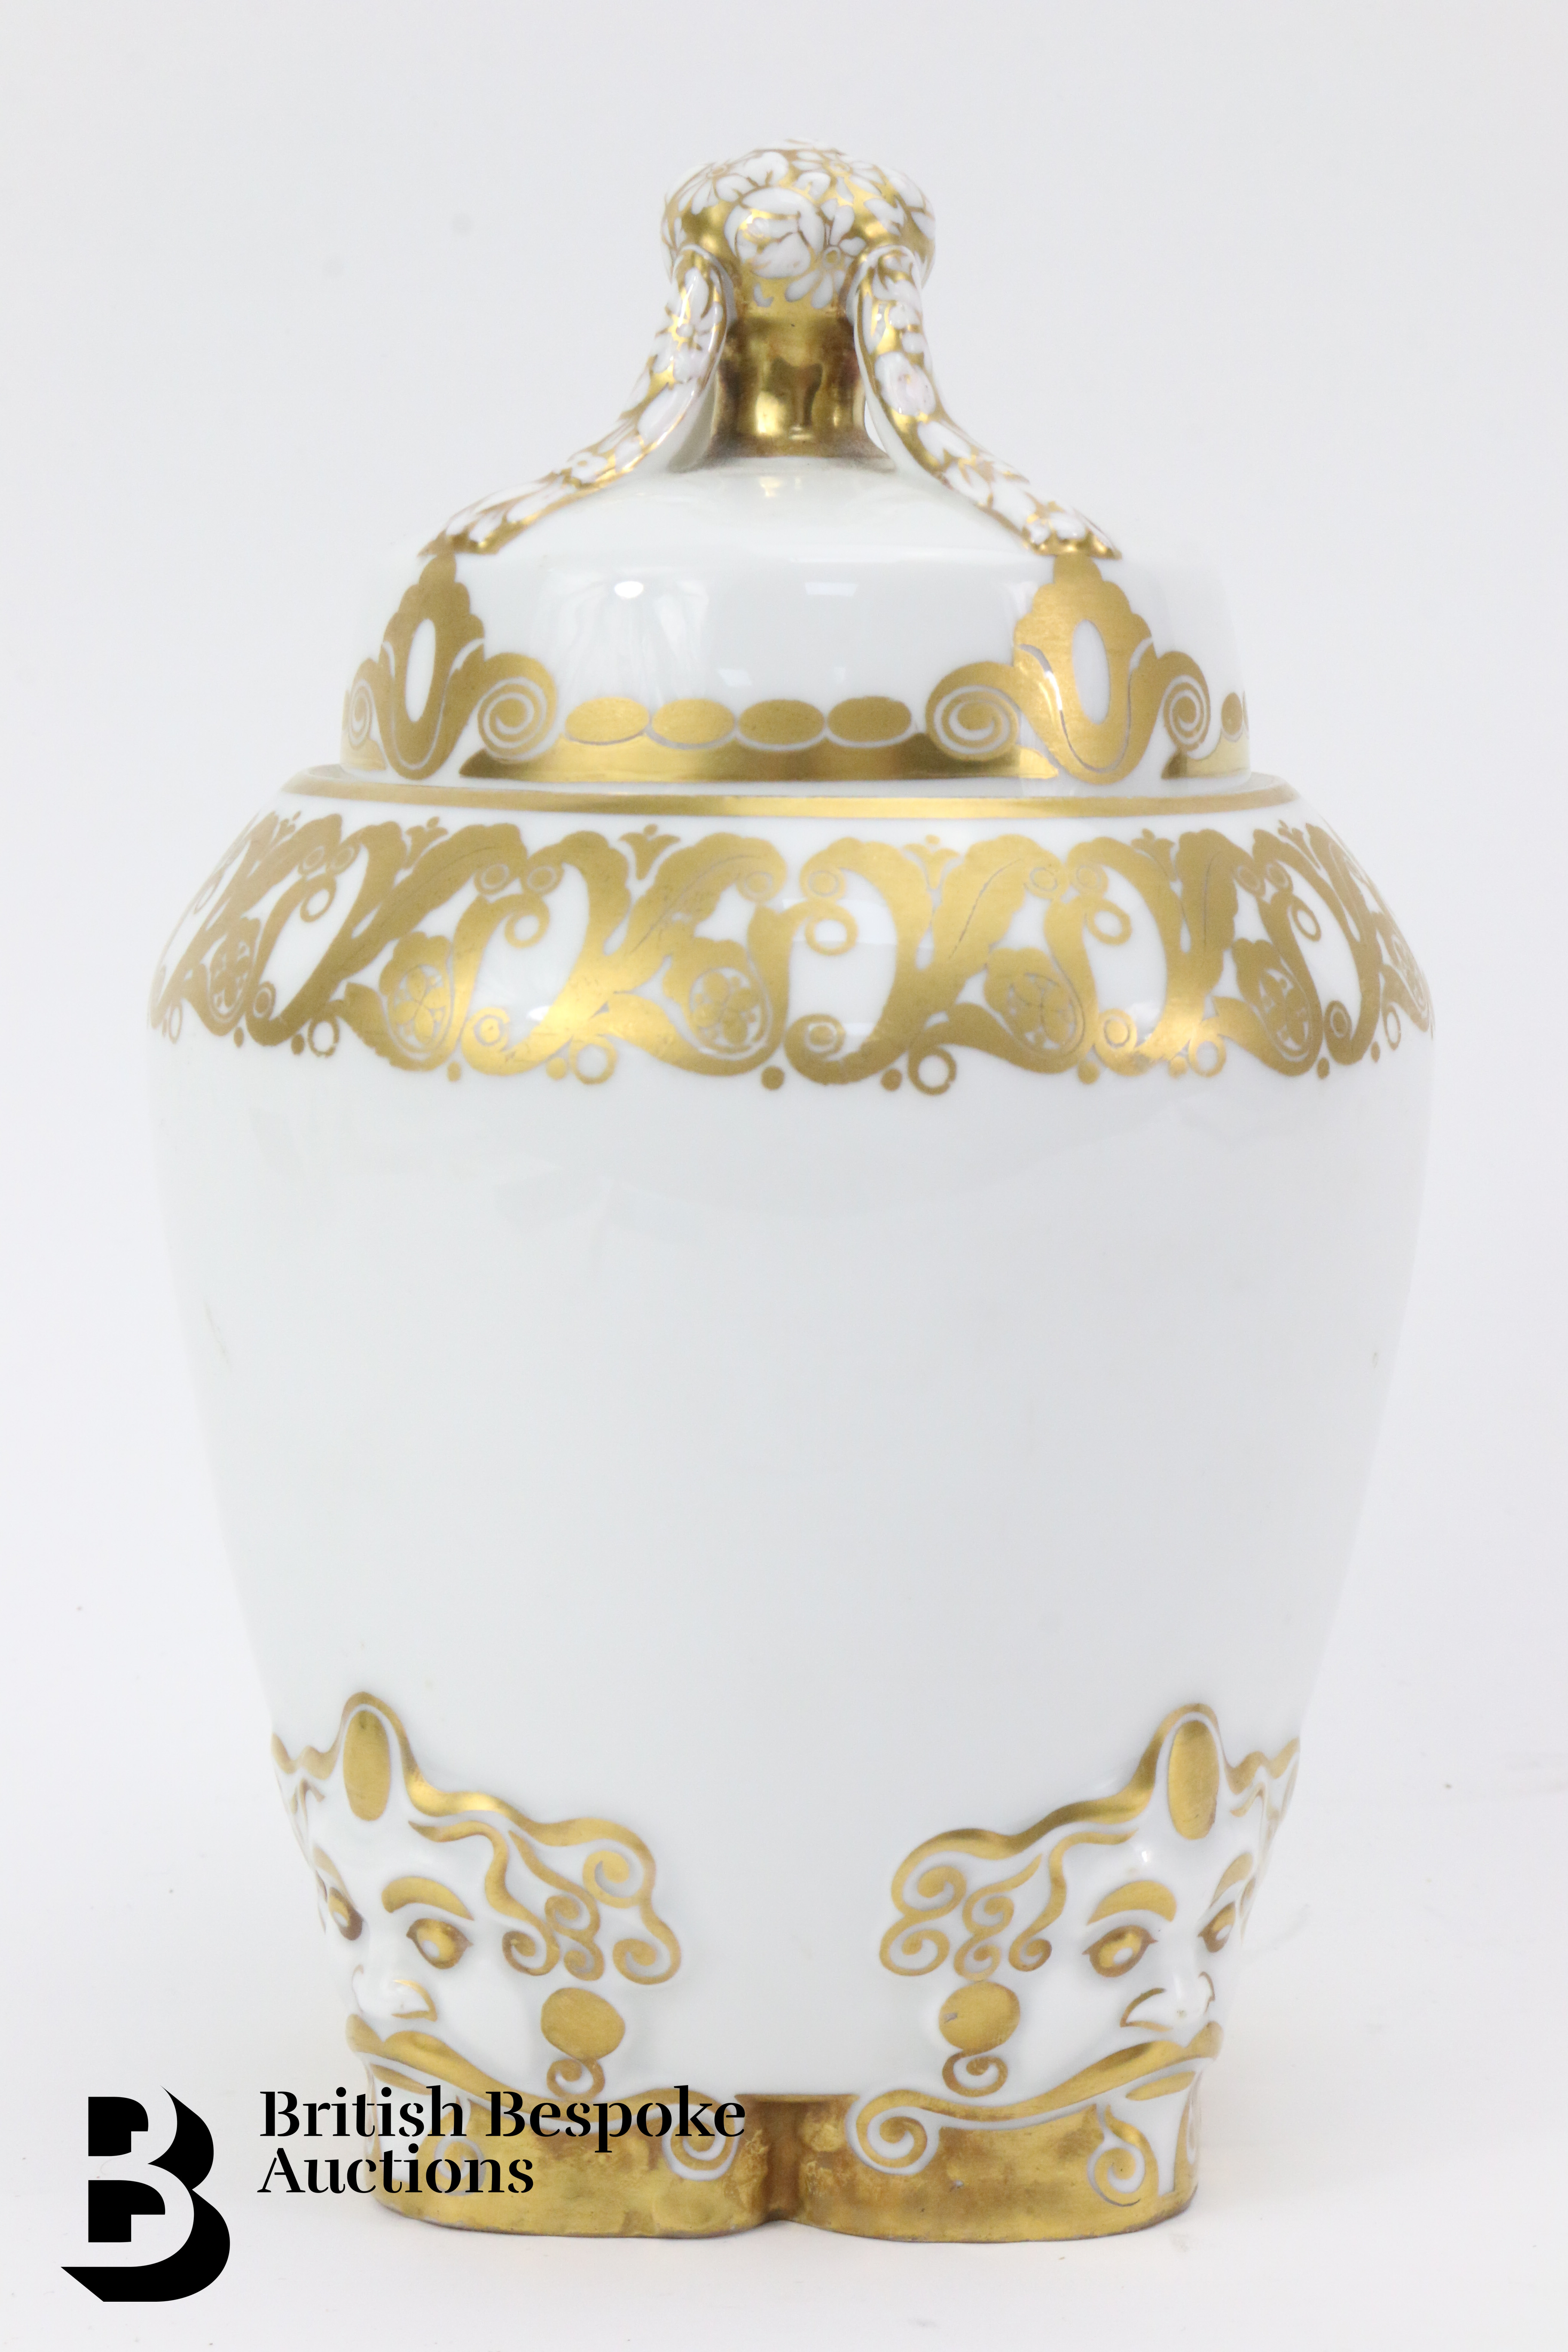 Hutschenreuther Porcelain Jar and Cover - Image 4 of 8